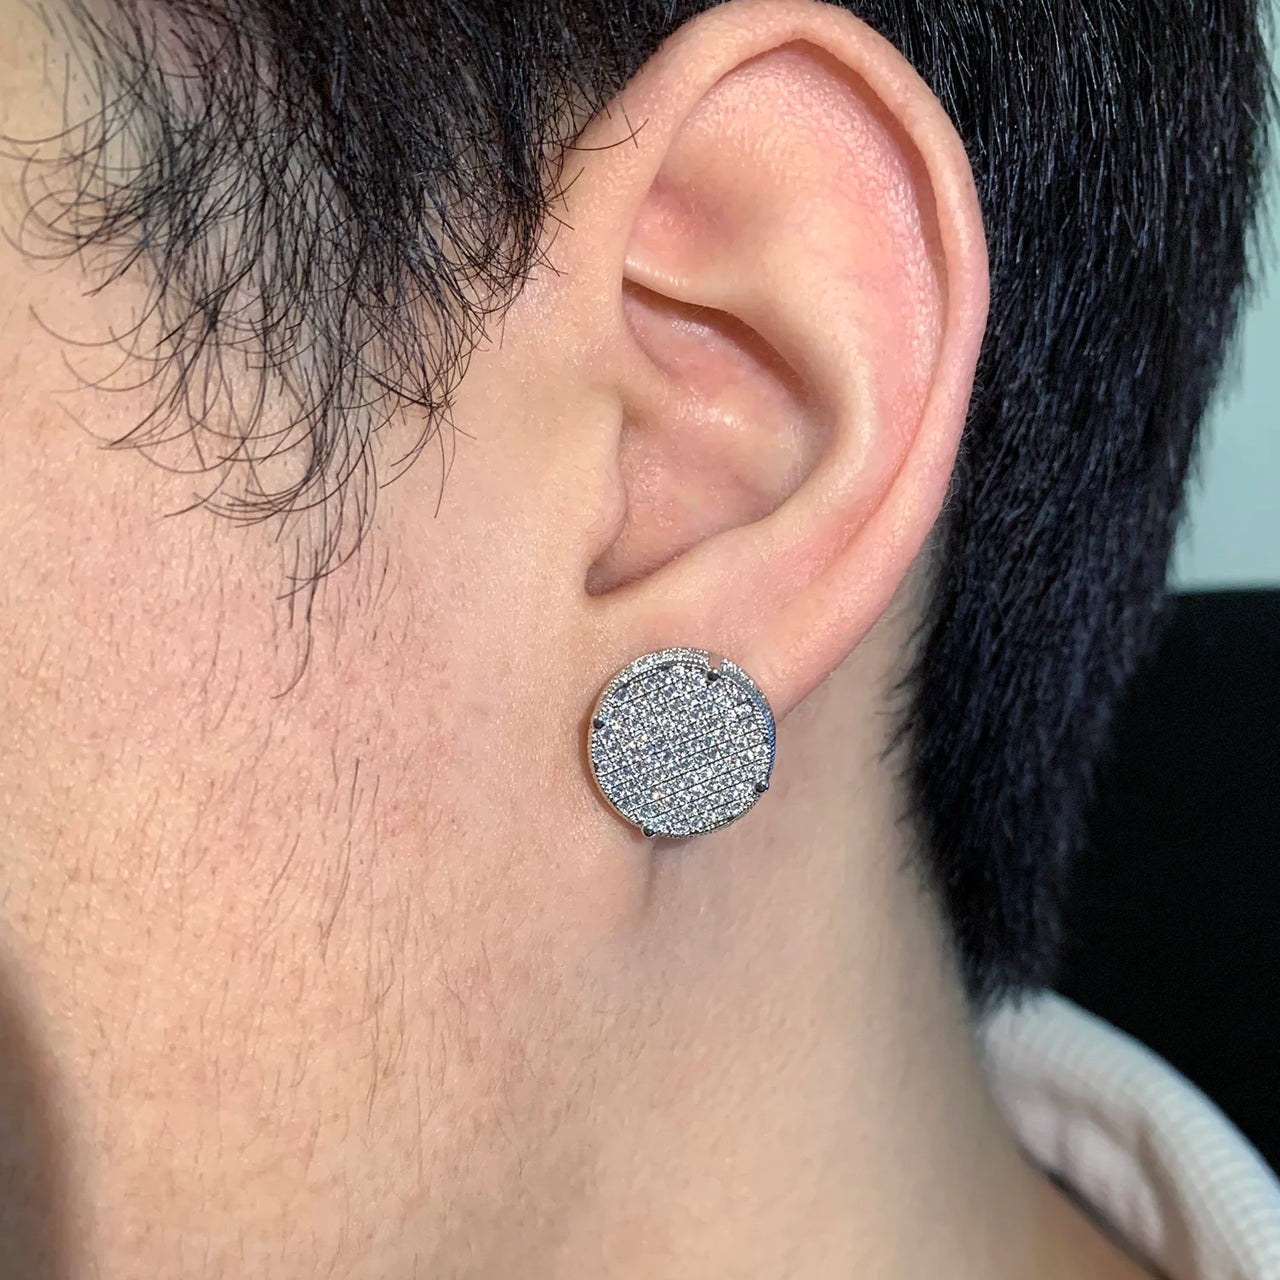 14mm Big Round Cut Pave Earrings - Different Drips